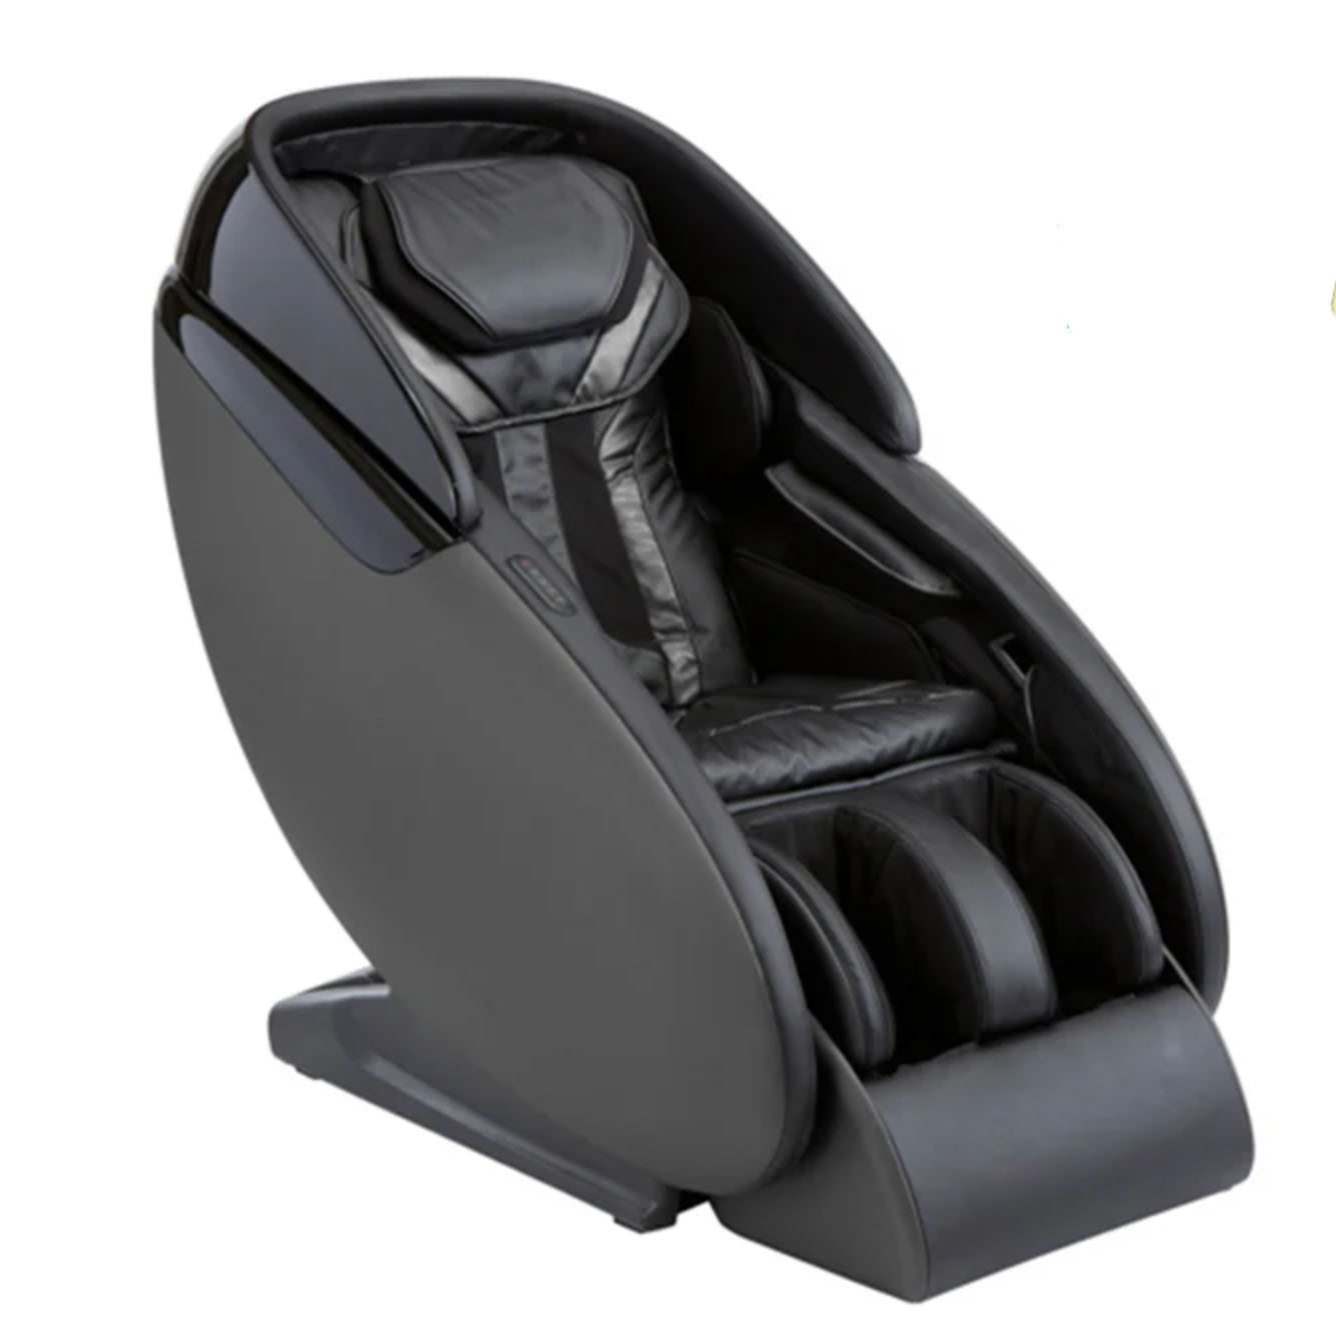 Side-view of black massage chair